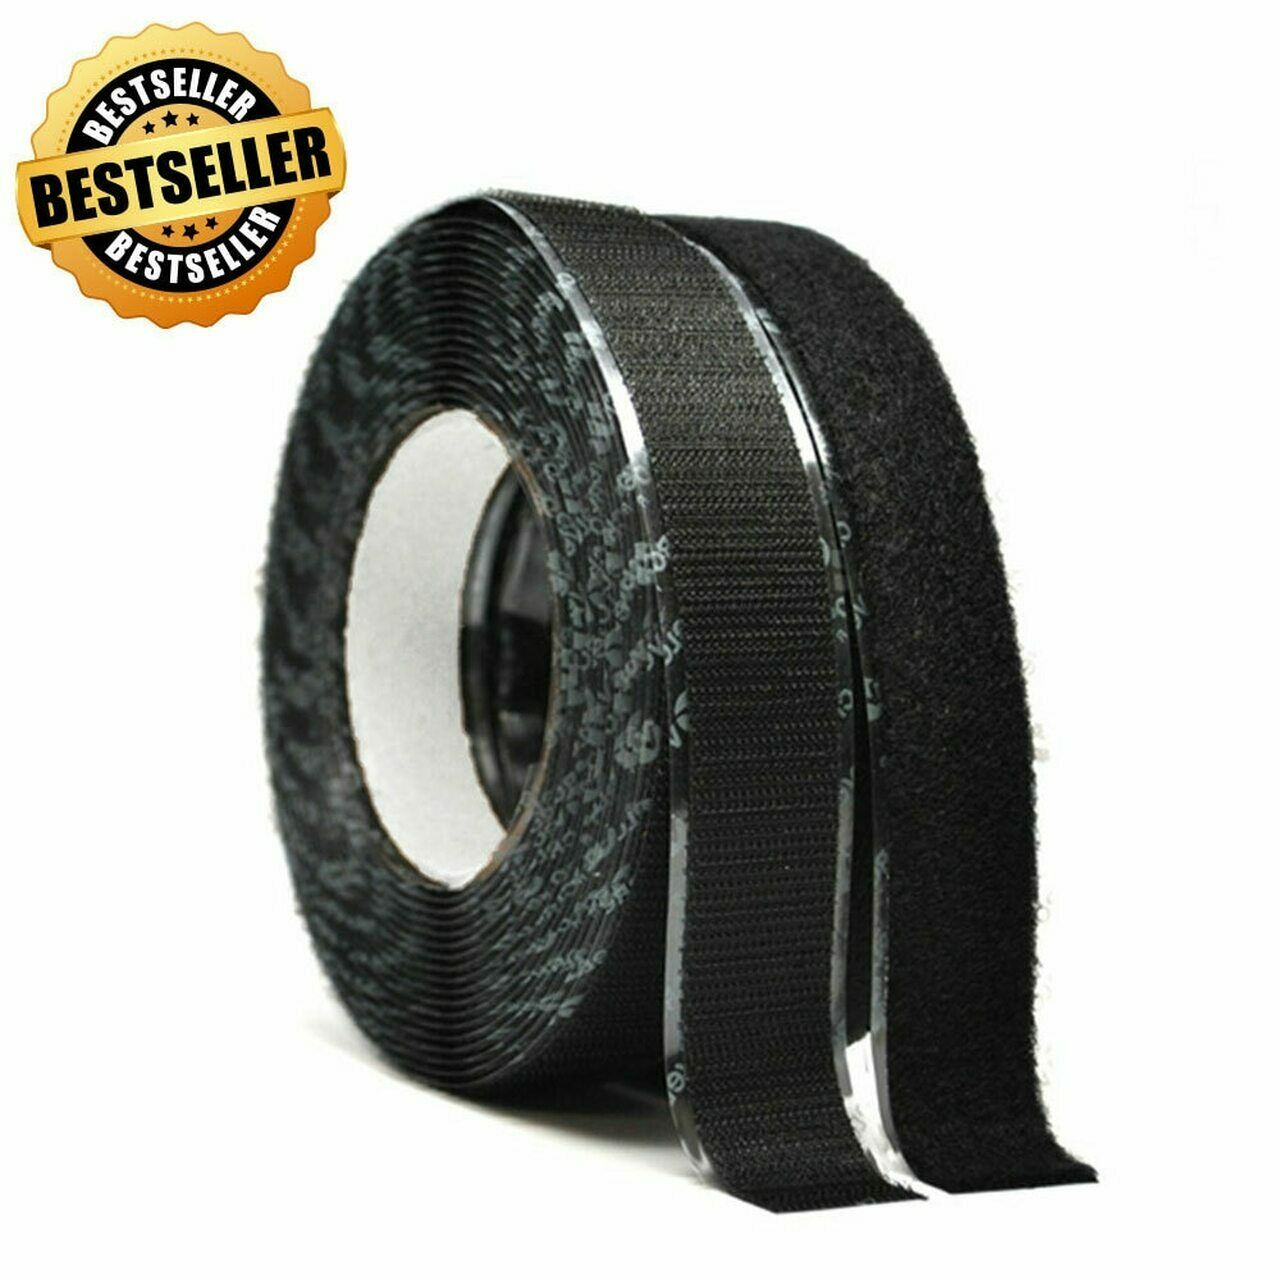 2" Wide Velcro® Brand High-tack Self Adhesive Tape Strip Set - 36" In. Lengths